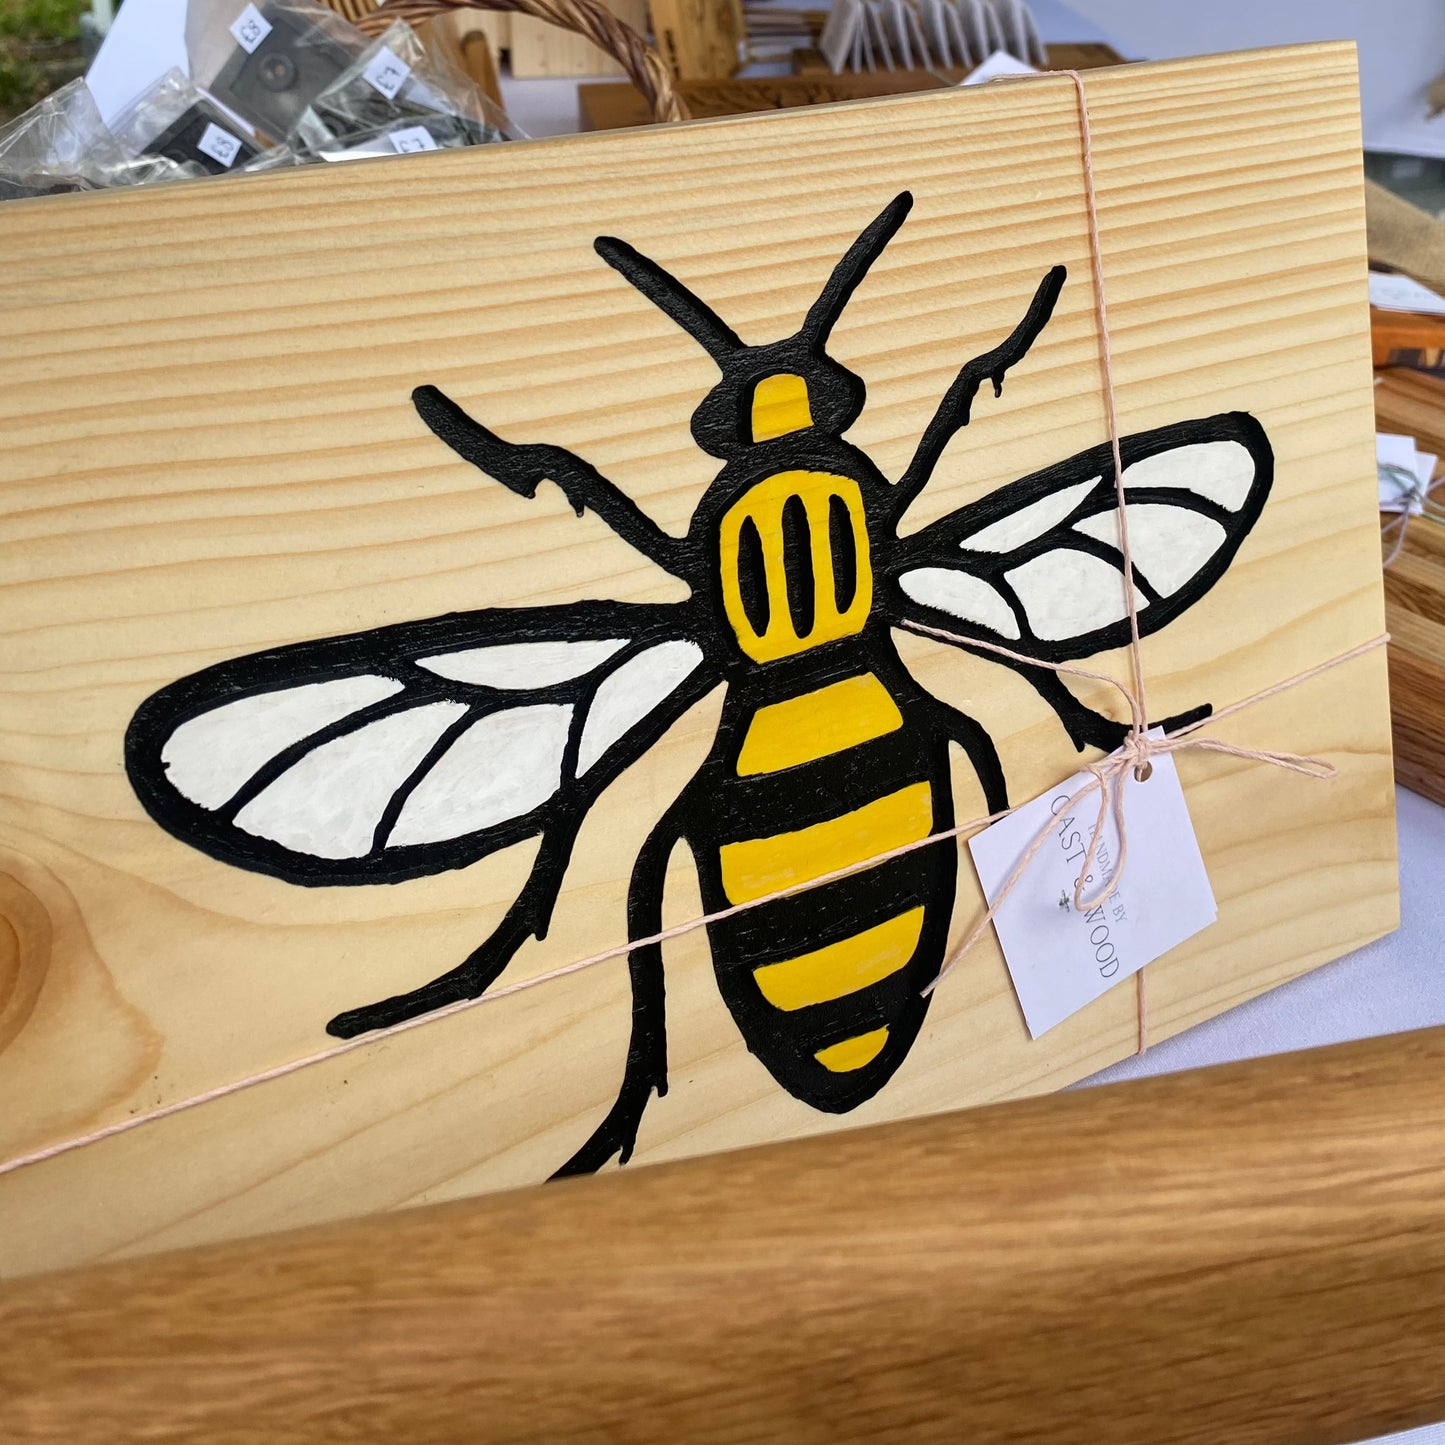 Manchester Bee Hand Carved Sign